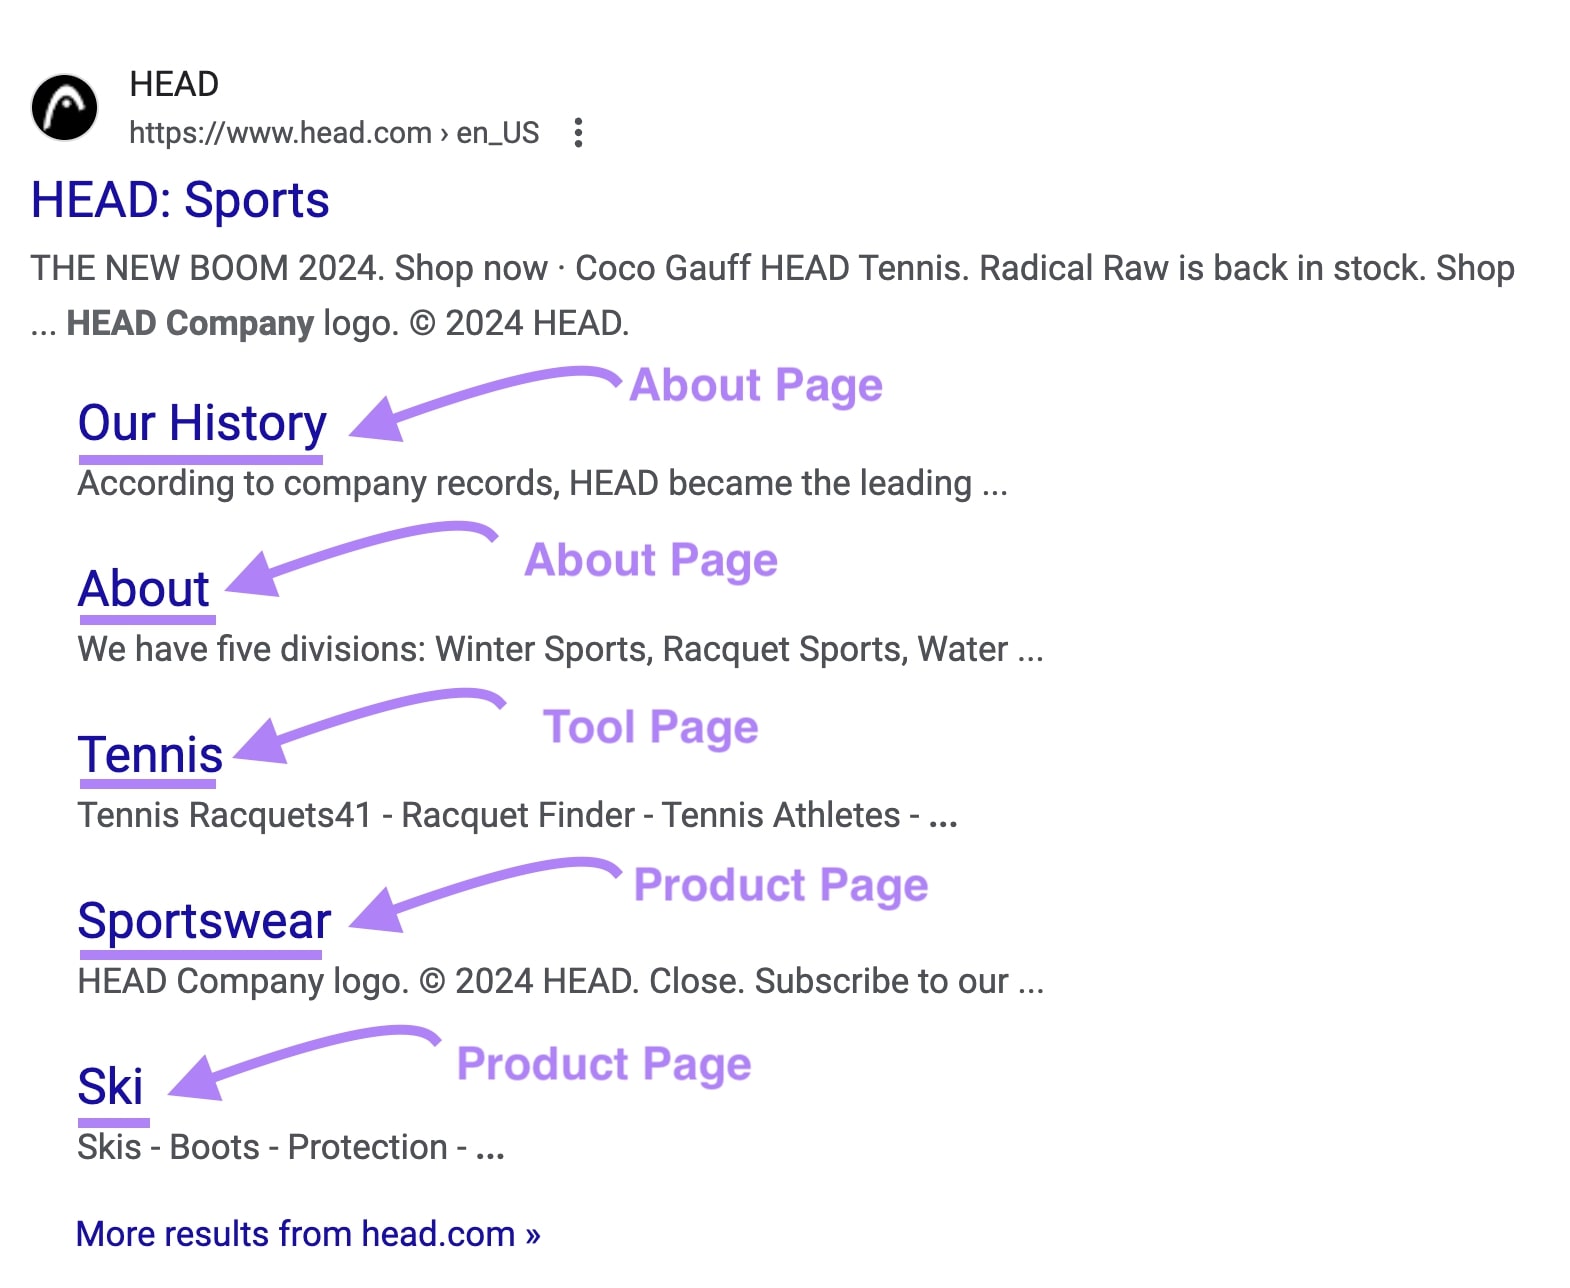 Google search result for HEAD showing multiple sitelinks for about pages, a tool page, and product pages.